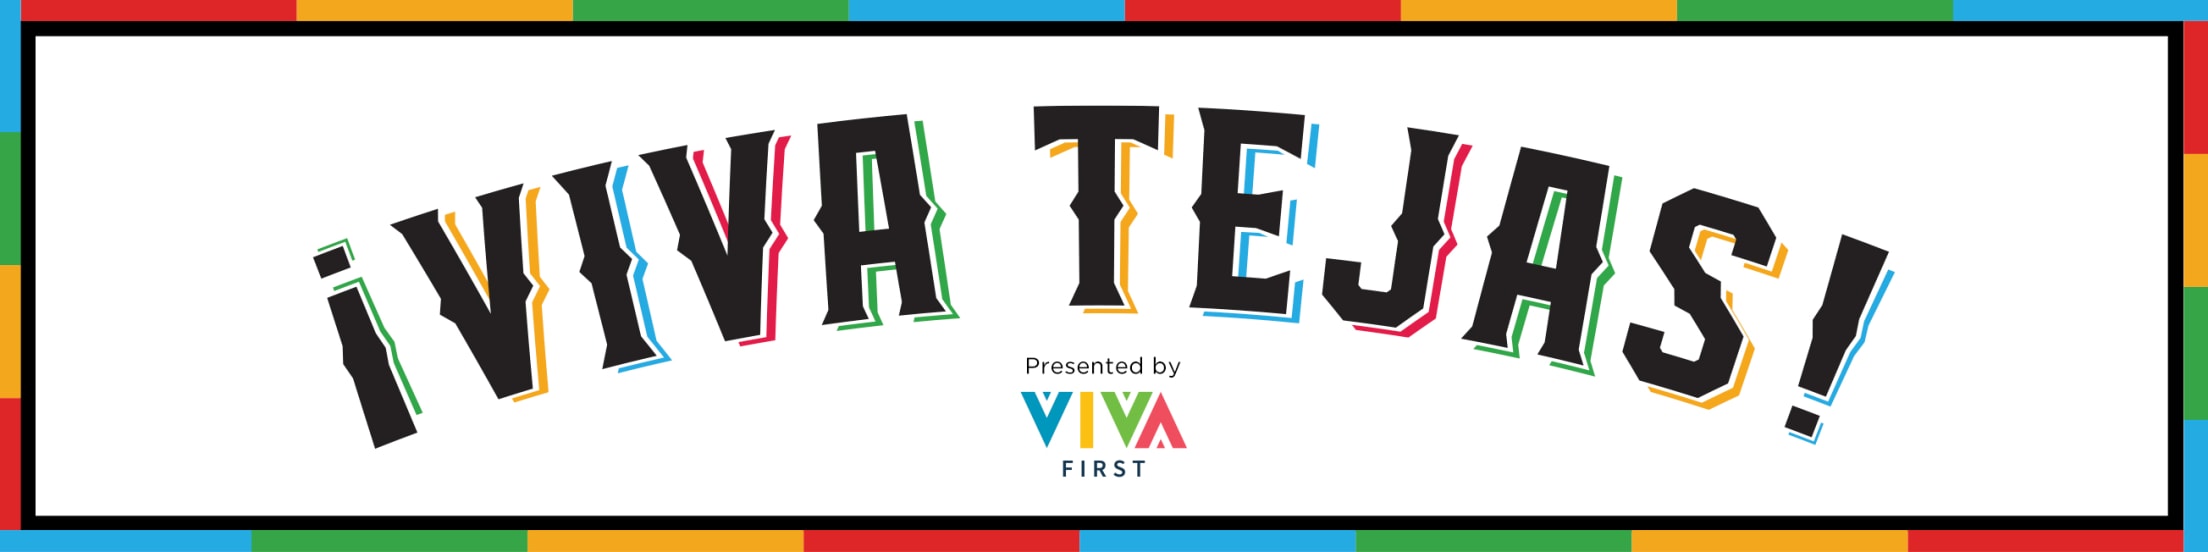 Texas Rangers - ¡Viva Tejas! Join us on the North Plaza